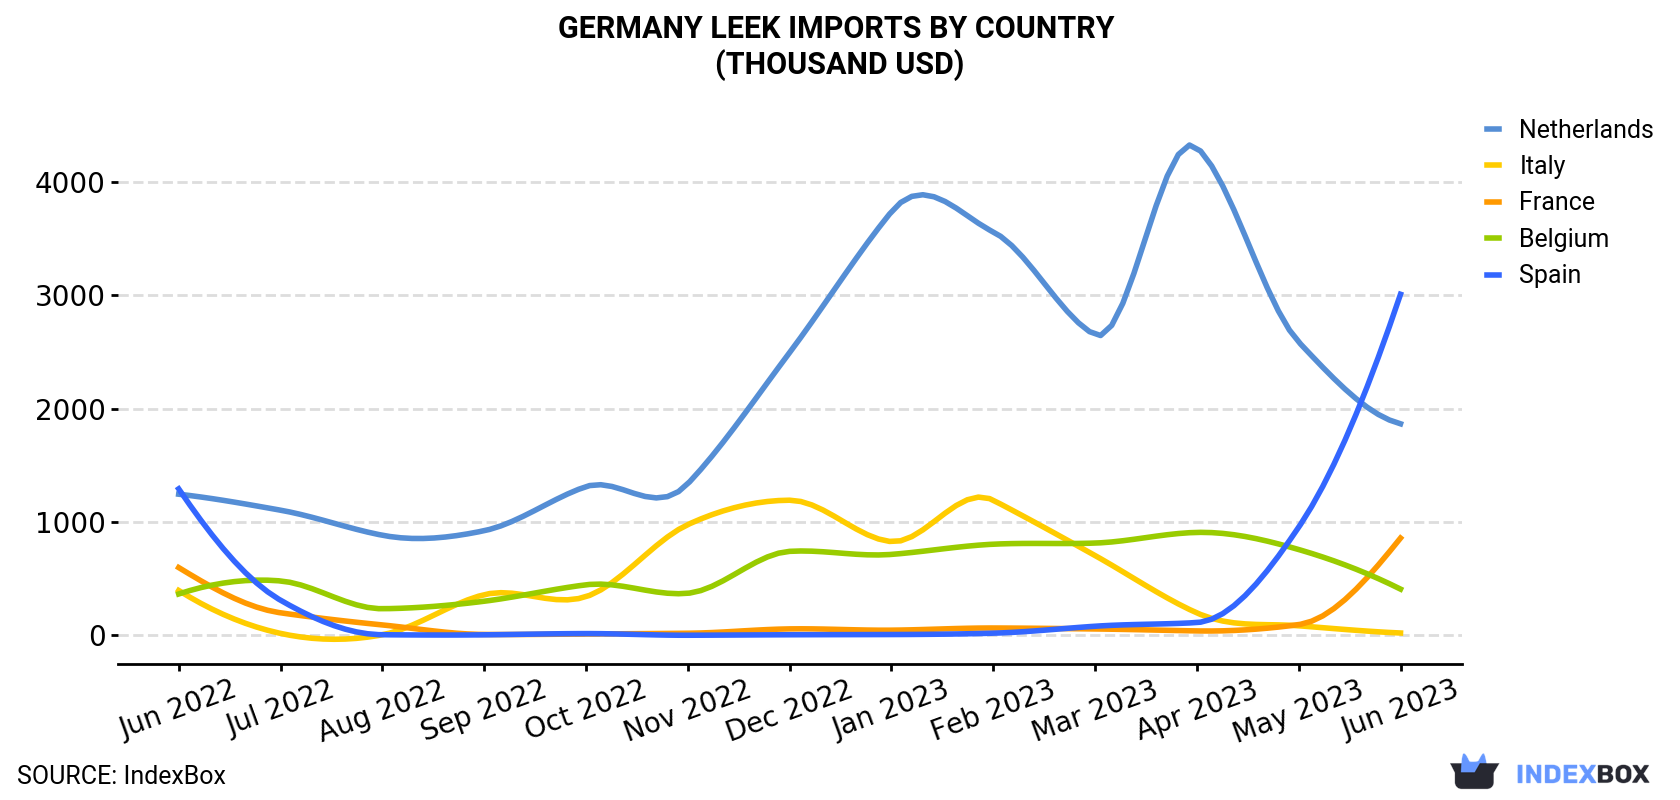 Germany Leek Imports By Country (Thousand USD)